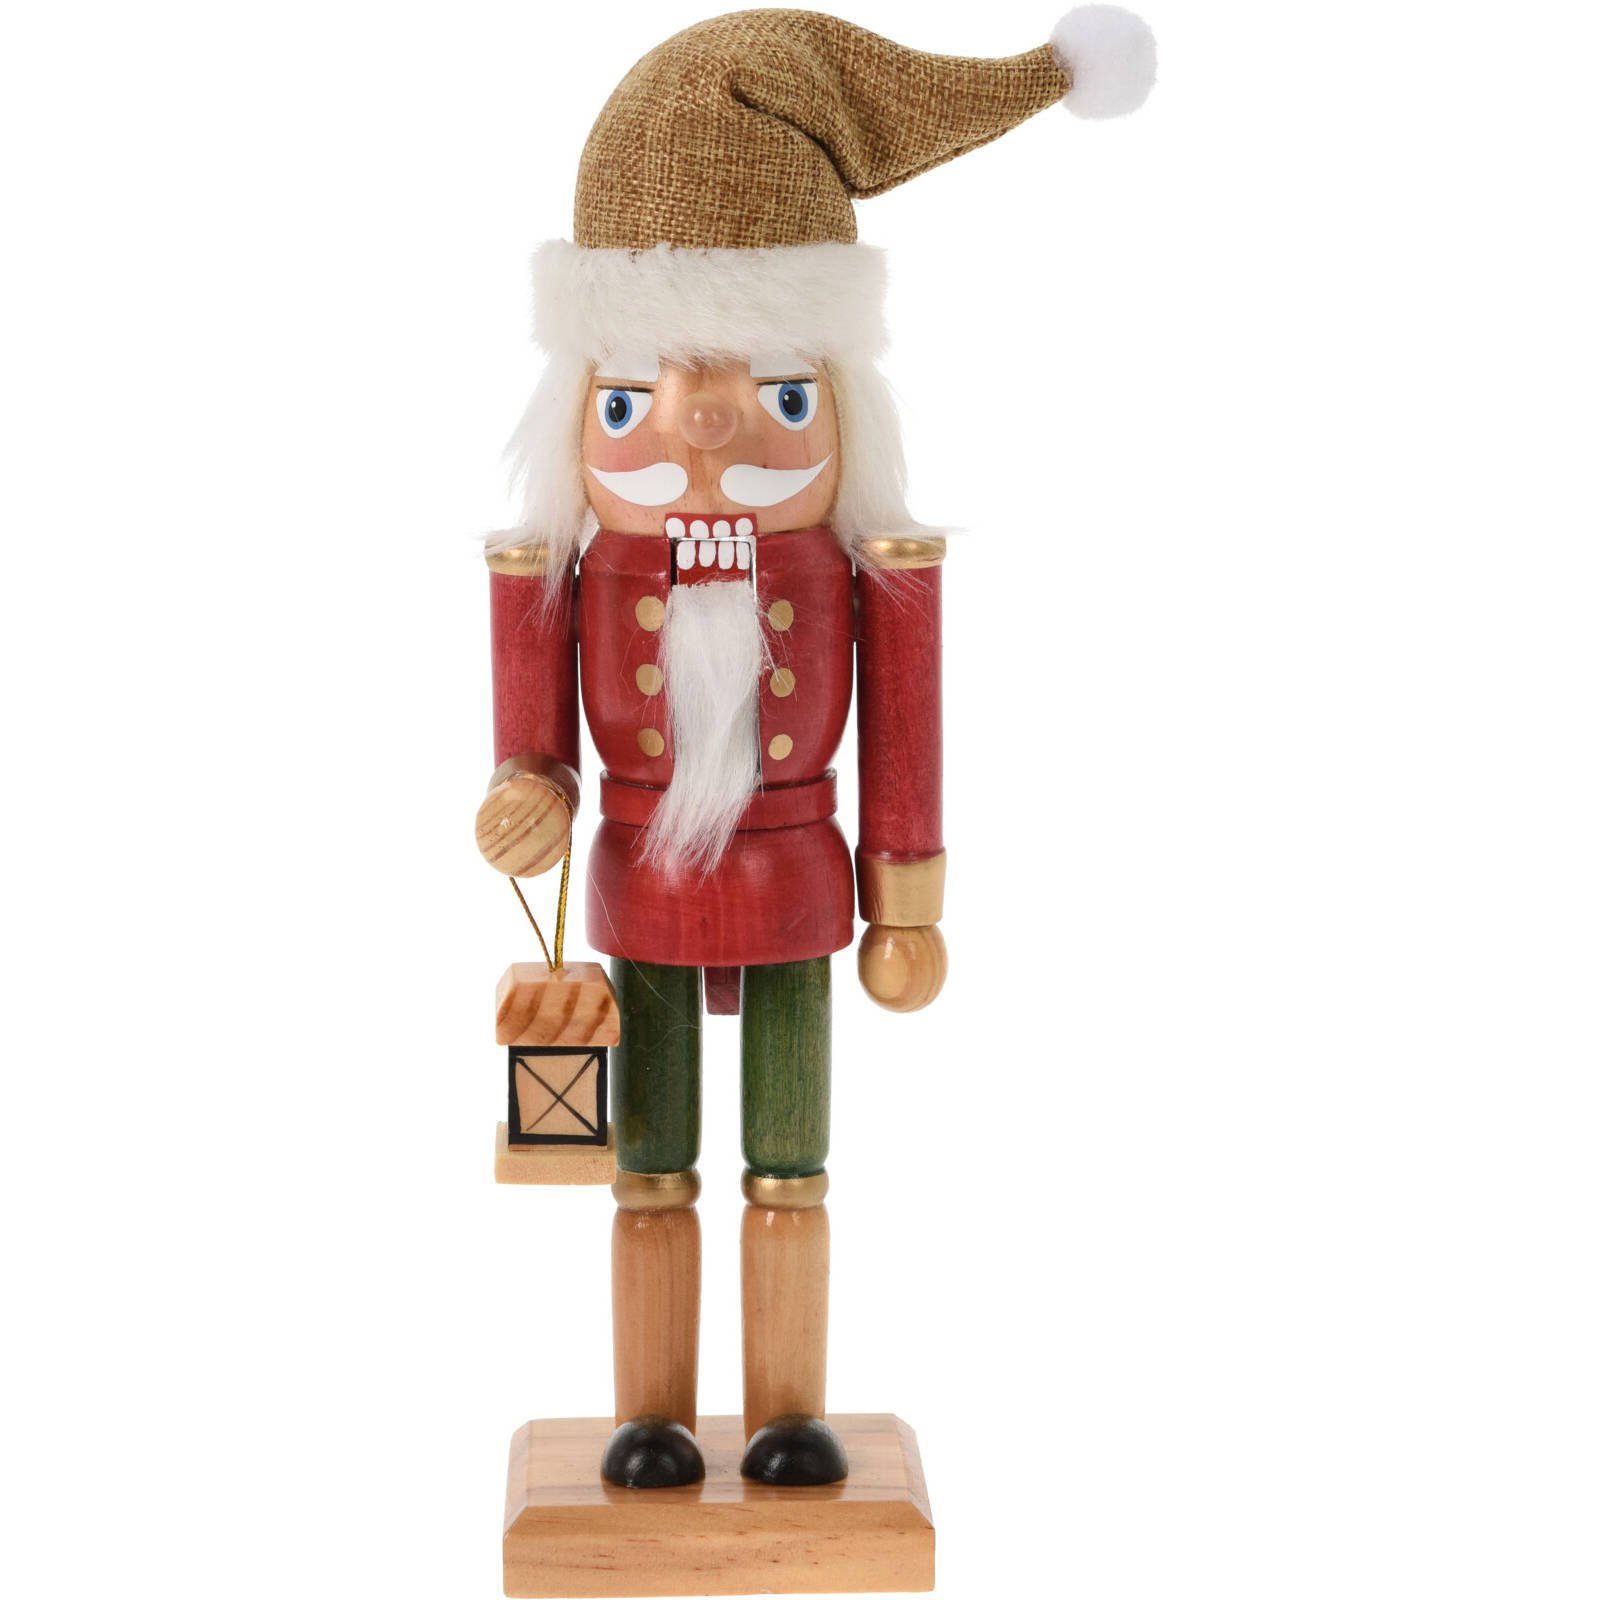 Home & collection Nussknacker mit styling Laterne Weihnachtsfigur